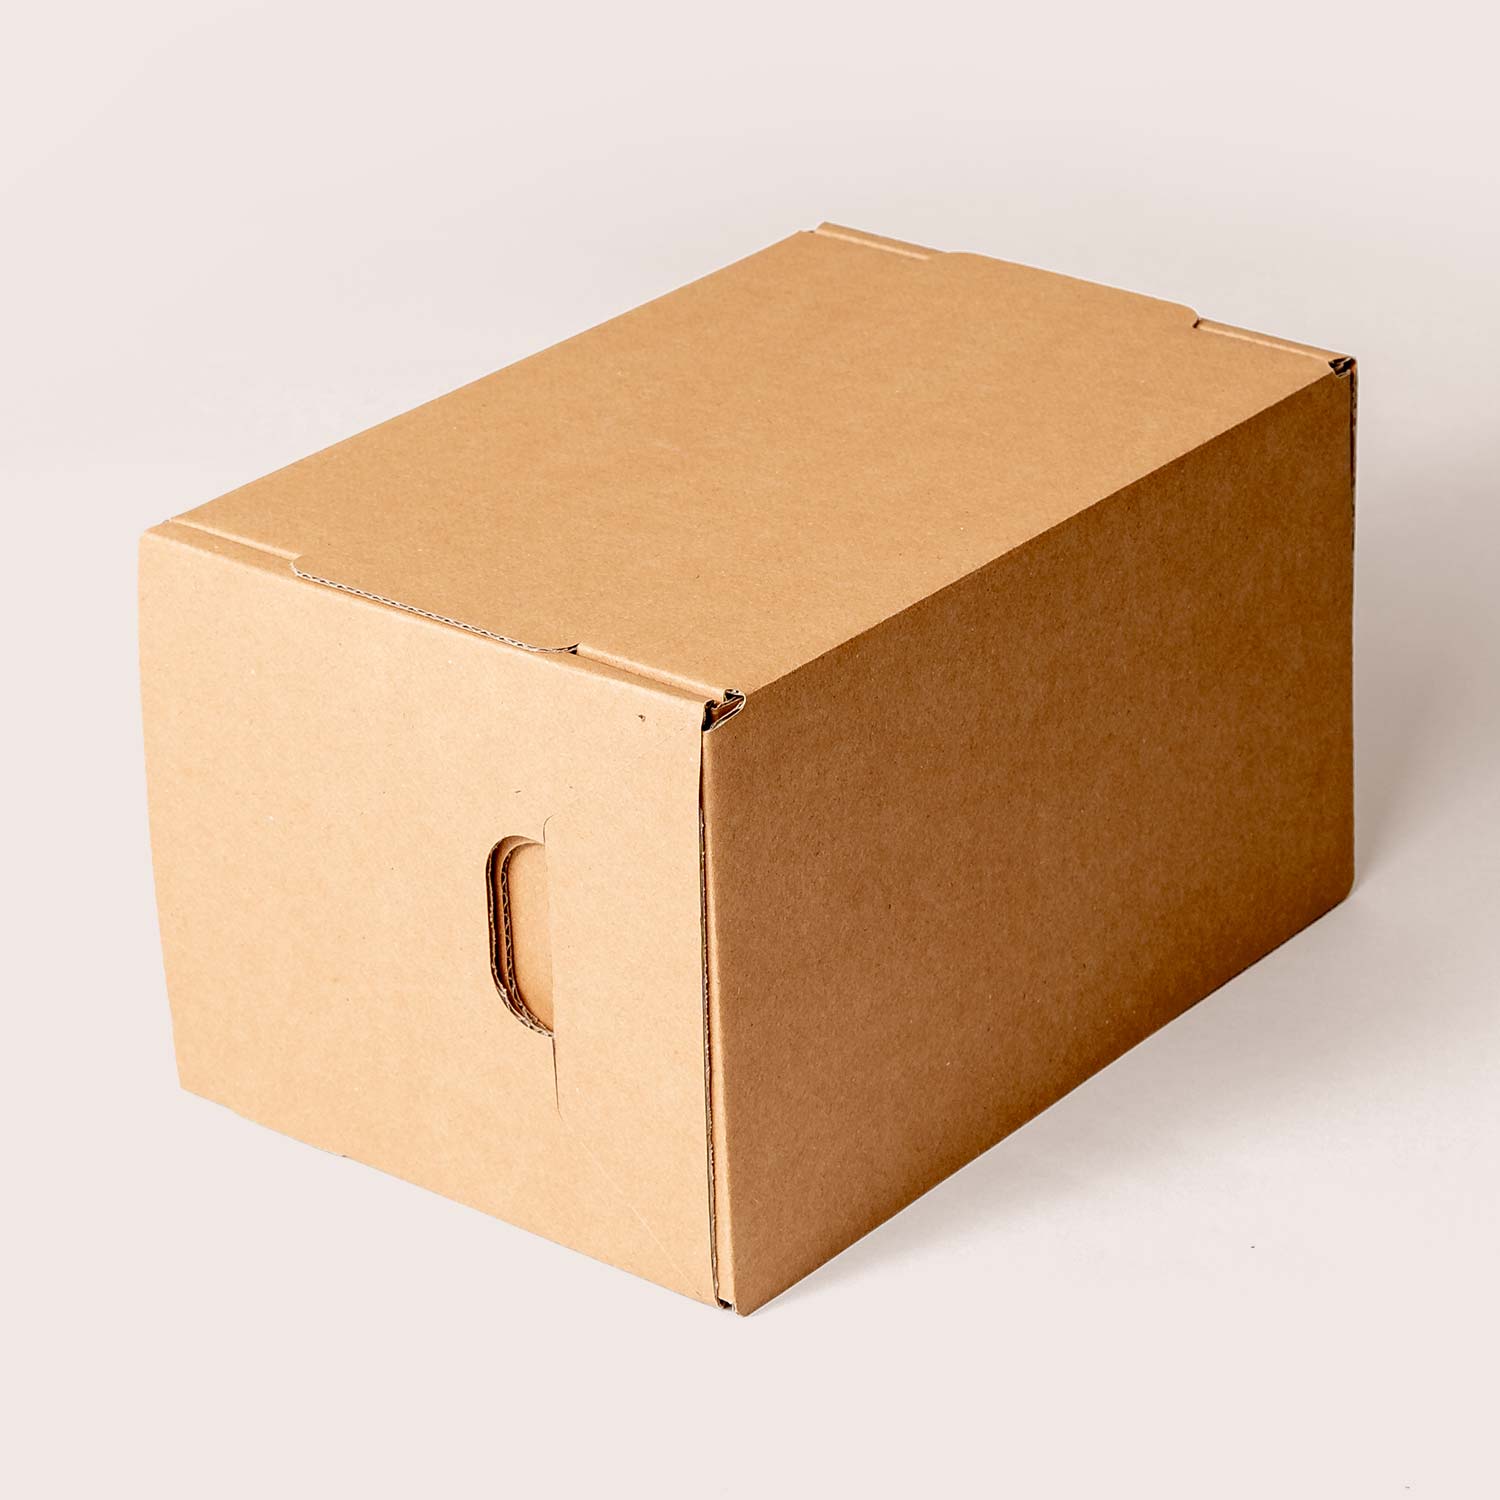 E-commerce boxes from THIMM